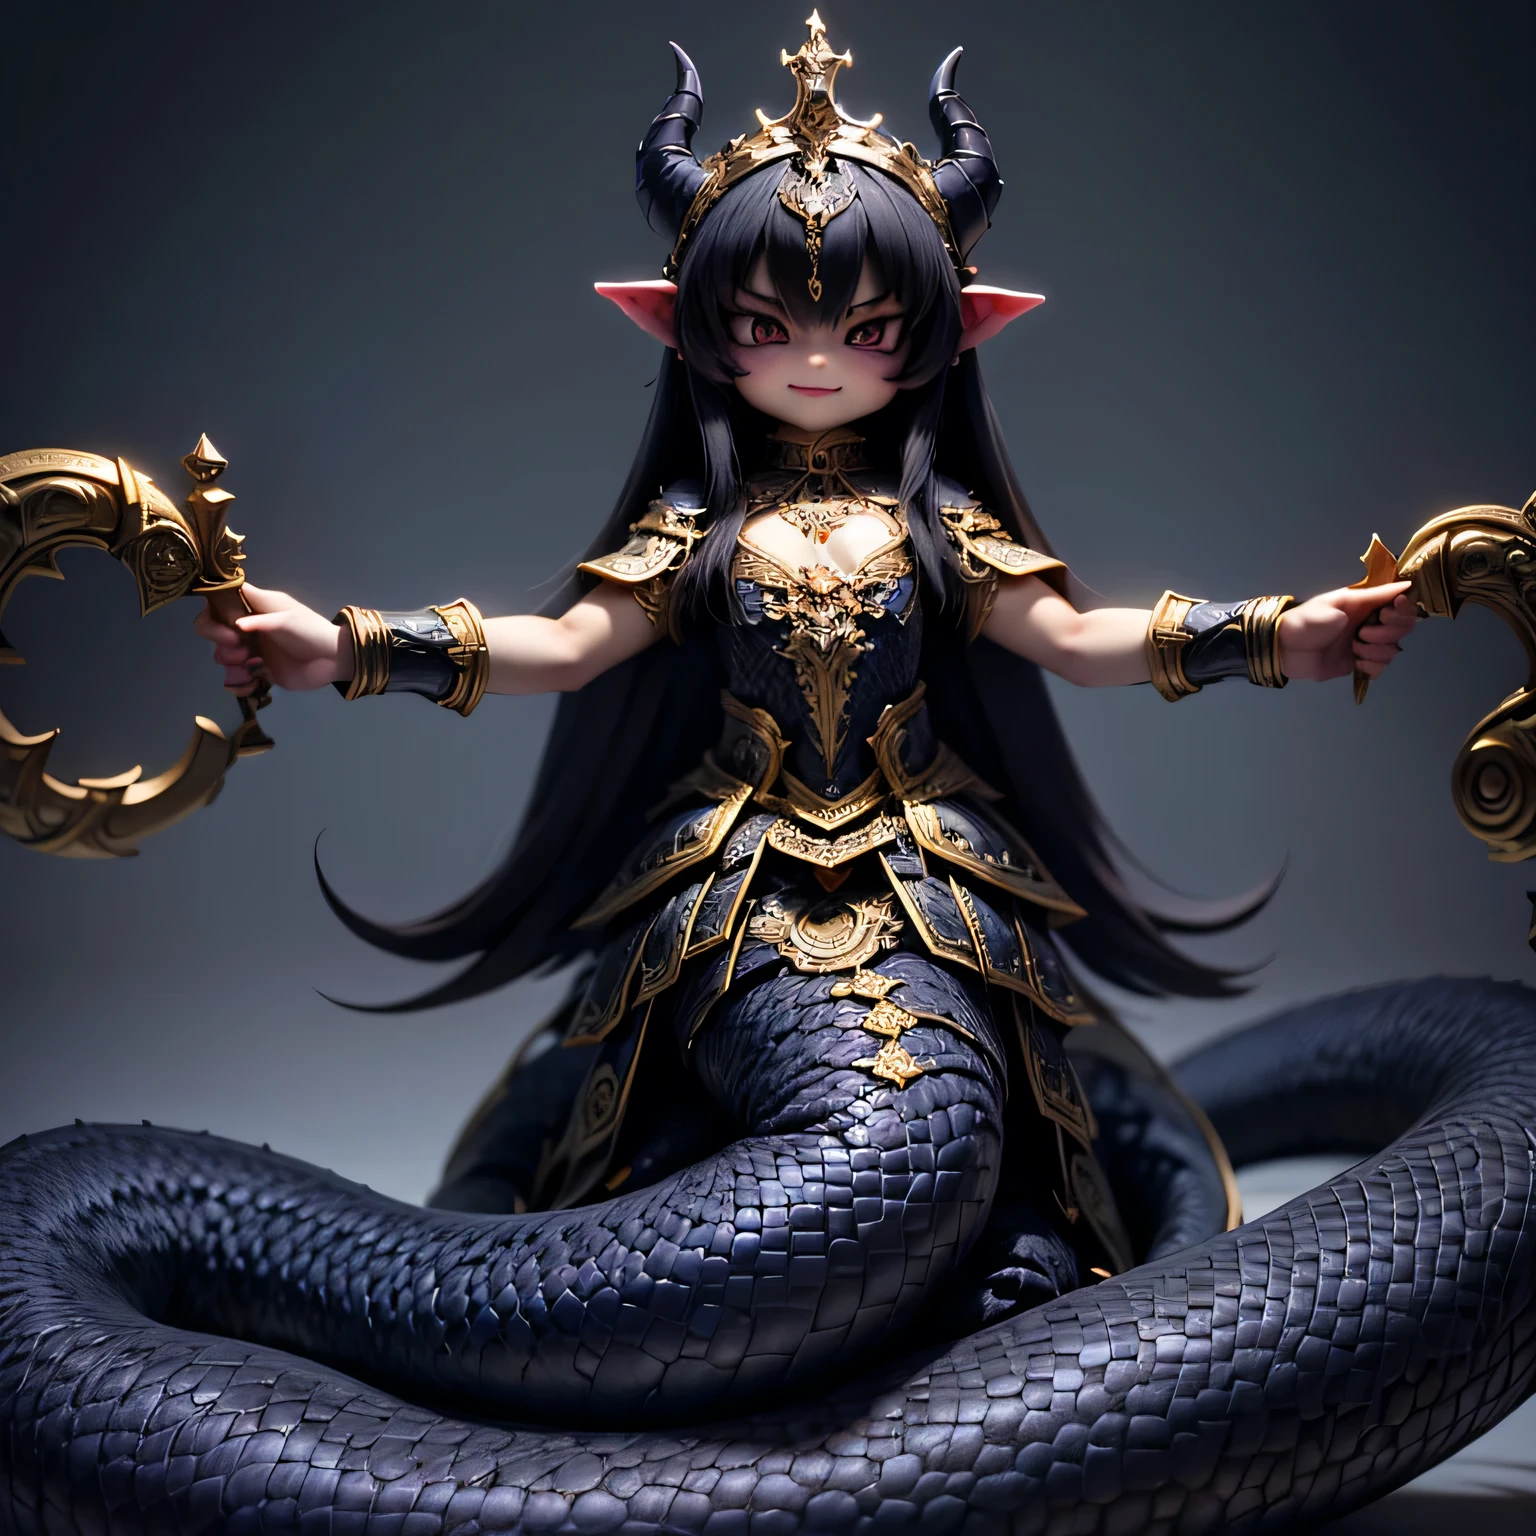 (Superflat, Flat Shading),Lamia Queen\(cute,kawaii,small kid,Geeky feel,Black Scales,Arrogant and sharp gaze,Intimidating posture,Blue pattern on the scales,long fluffy black hair,Gold Chain Mail,bracelet,Taking an arrogant stance on the royal throne,evil smile,Barbaric style,very cute,dynamic pose,\), BREAK ,background\(in the glorious palace,dark\),Dark fantasy,dynamic wide view,full body,High angle,quality\(8k,wallpaper of extremely detailed CG unit, ​masterpiece,hight resolution,top-quality,top-quality real texture skin,hyper realisitic,increase the resolution,RAW photos,best qualtiy,highly detailed,the wallpaper,cinematic lighting,ray trace,golden ratio,\),dynamic angle,anatomically correct hand,better hands,5fingers,[nsfw:1.5]